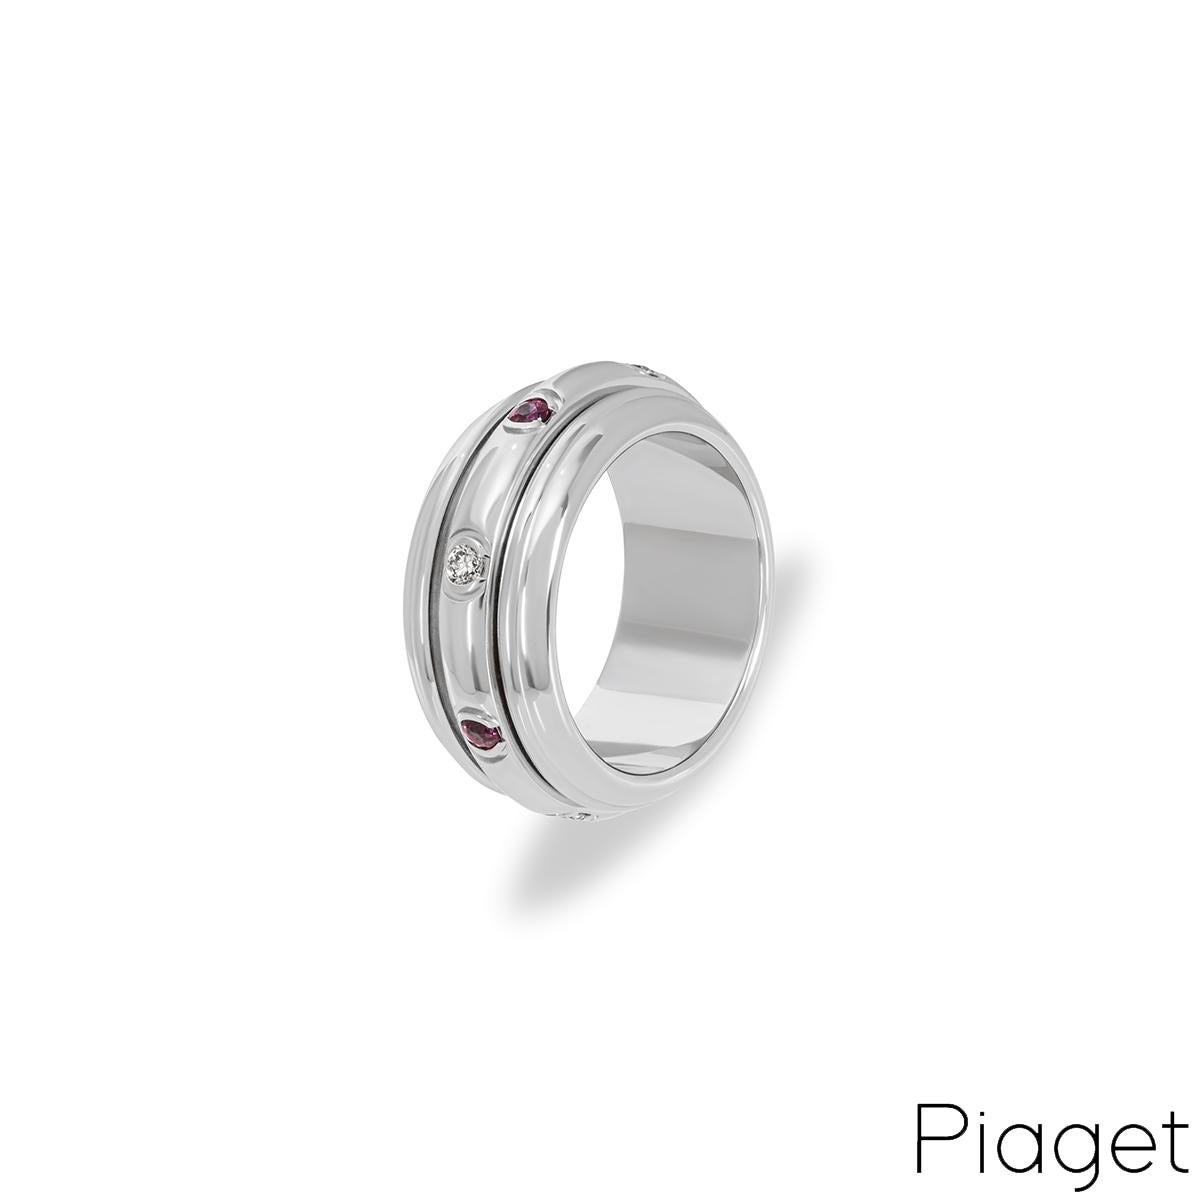 An 18k white gold ruby and diamond set ring by Piaget from the Possession collection. The ring features a freely moving centre band set with rubies and diamonds. There are four tension set rubies with an approximate total weight of 0.15ct and